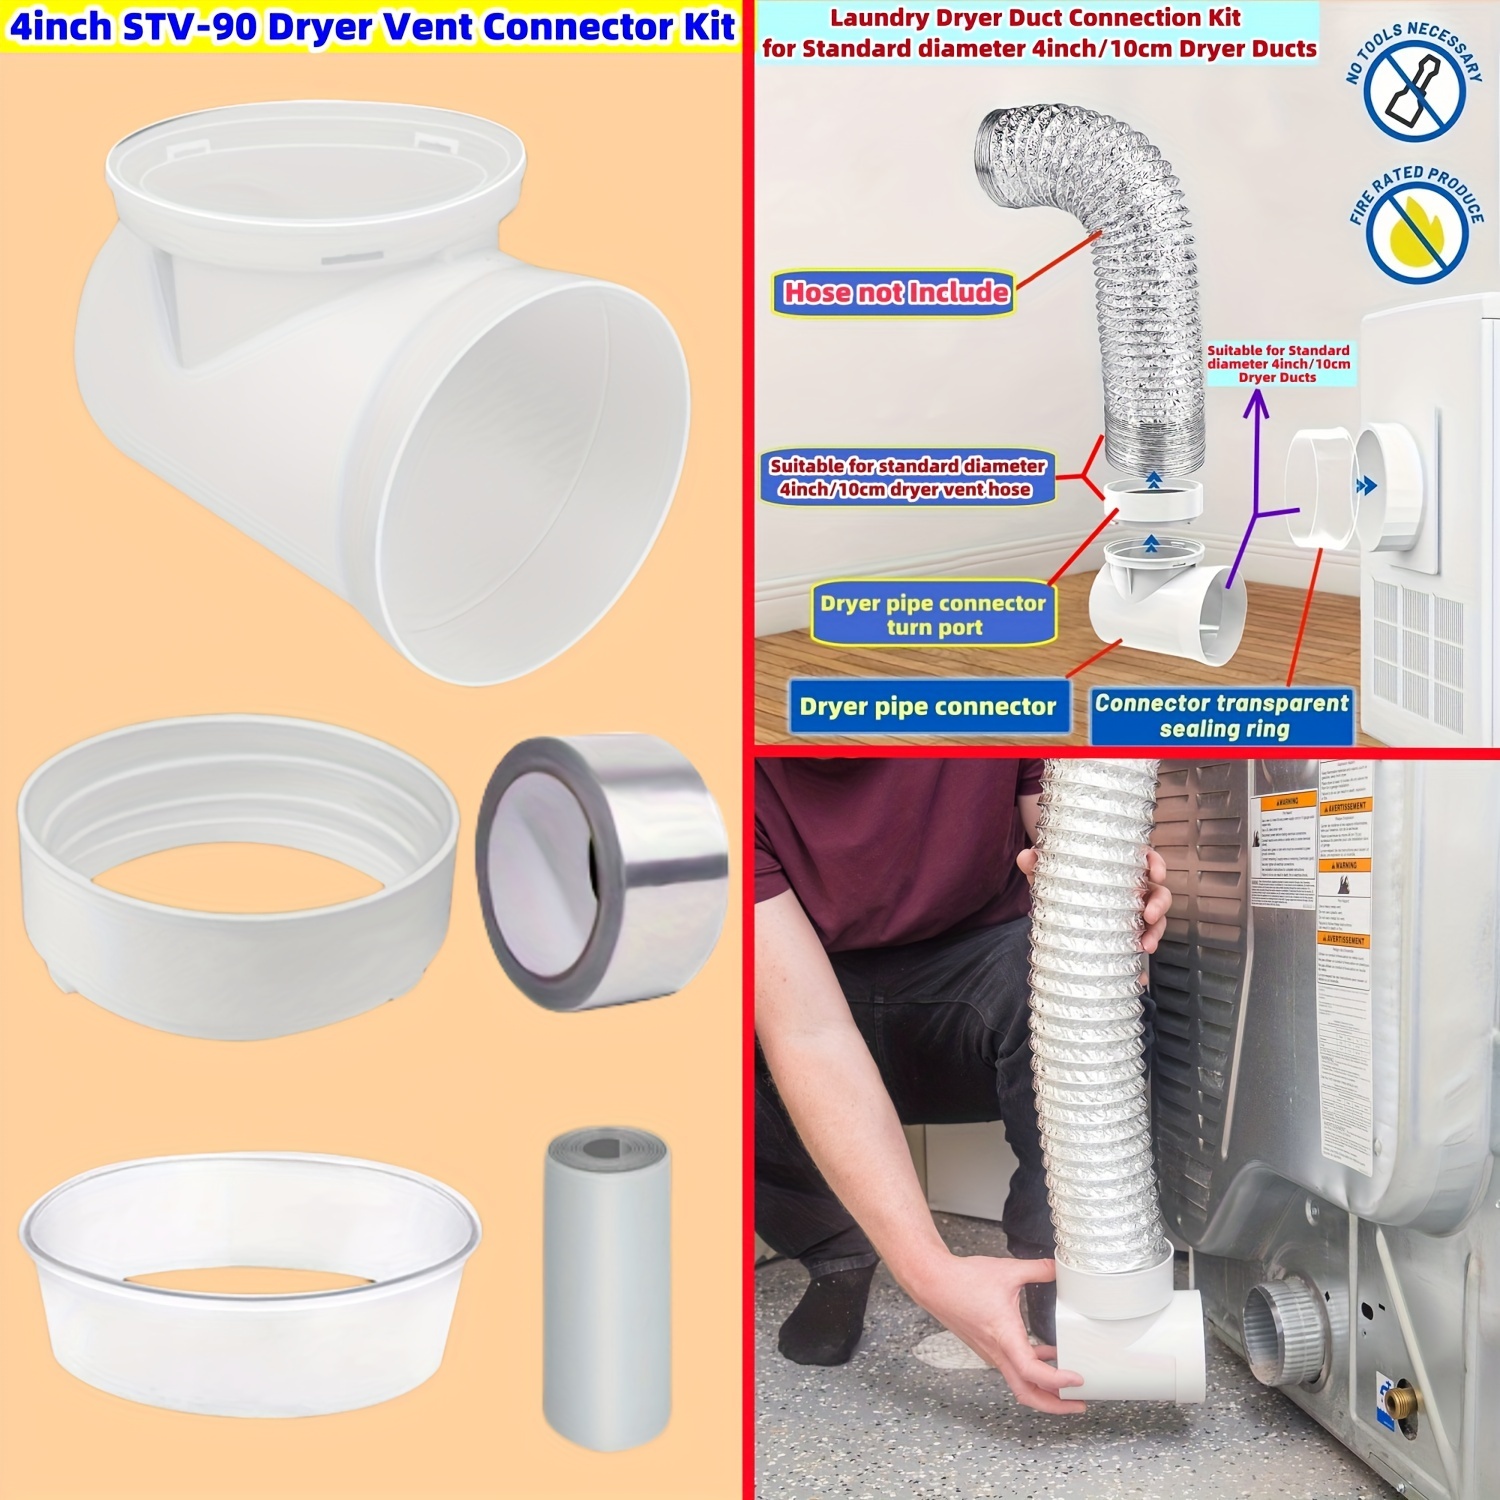 

Easy-install 4" Dryer Vent Kit With Safety Bracket & Stv-90 Connector - Perfect For Standard Laundry Ducts